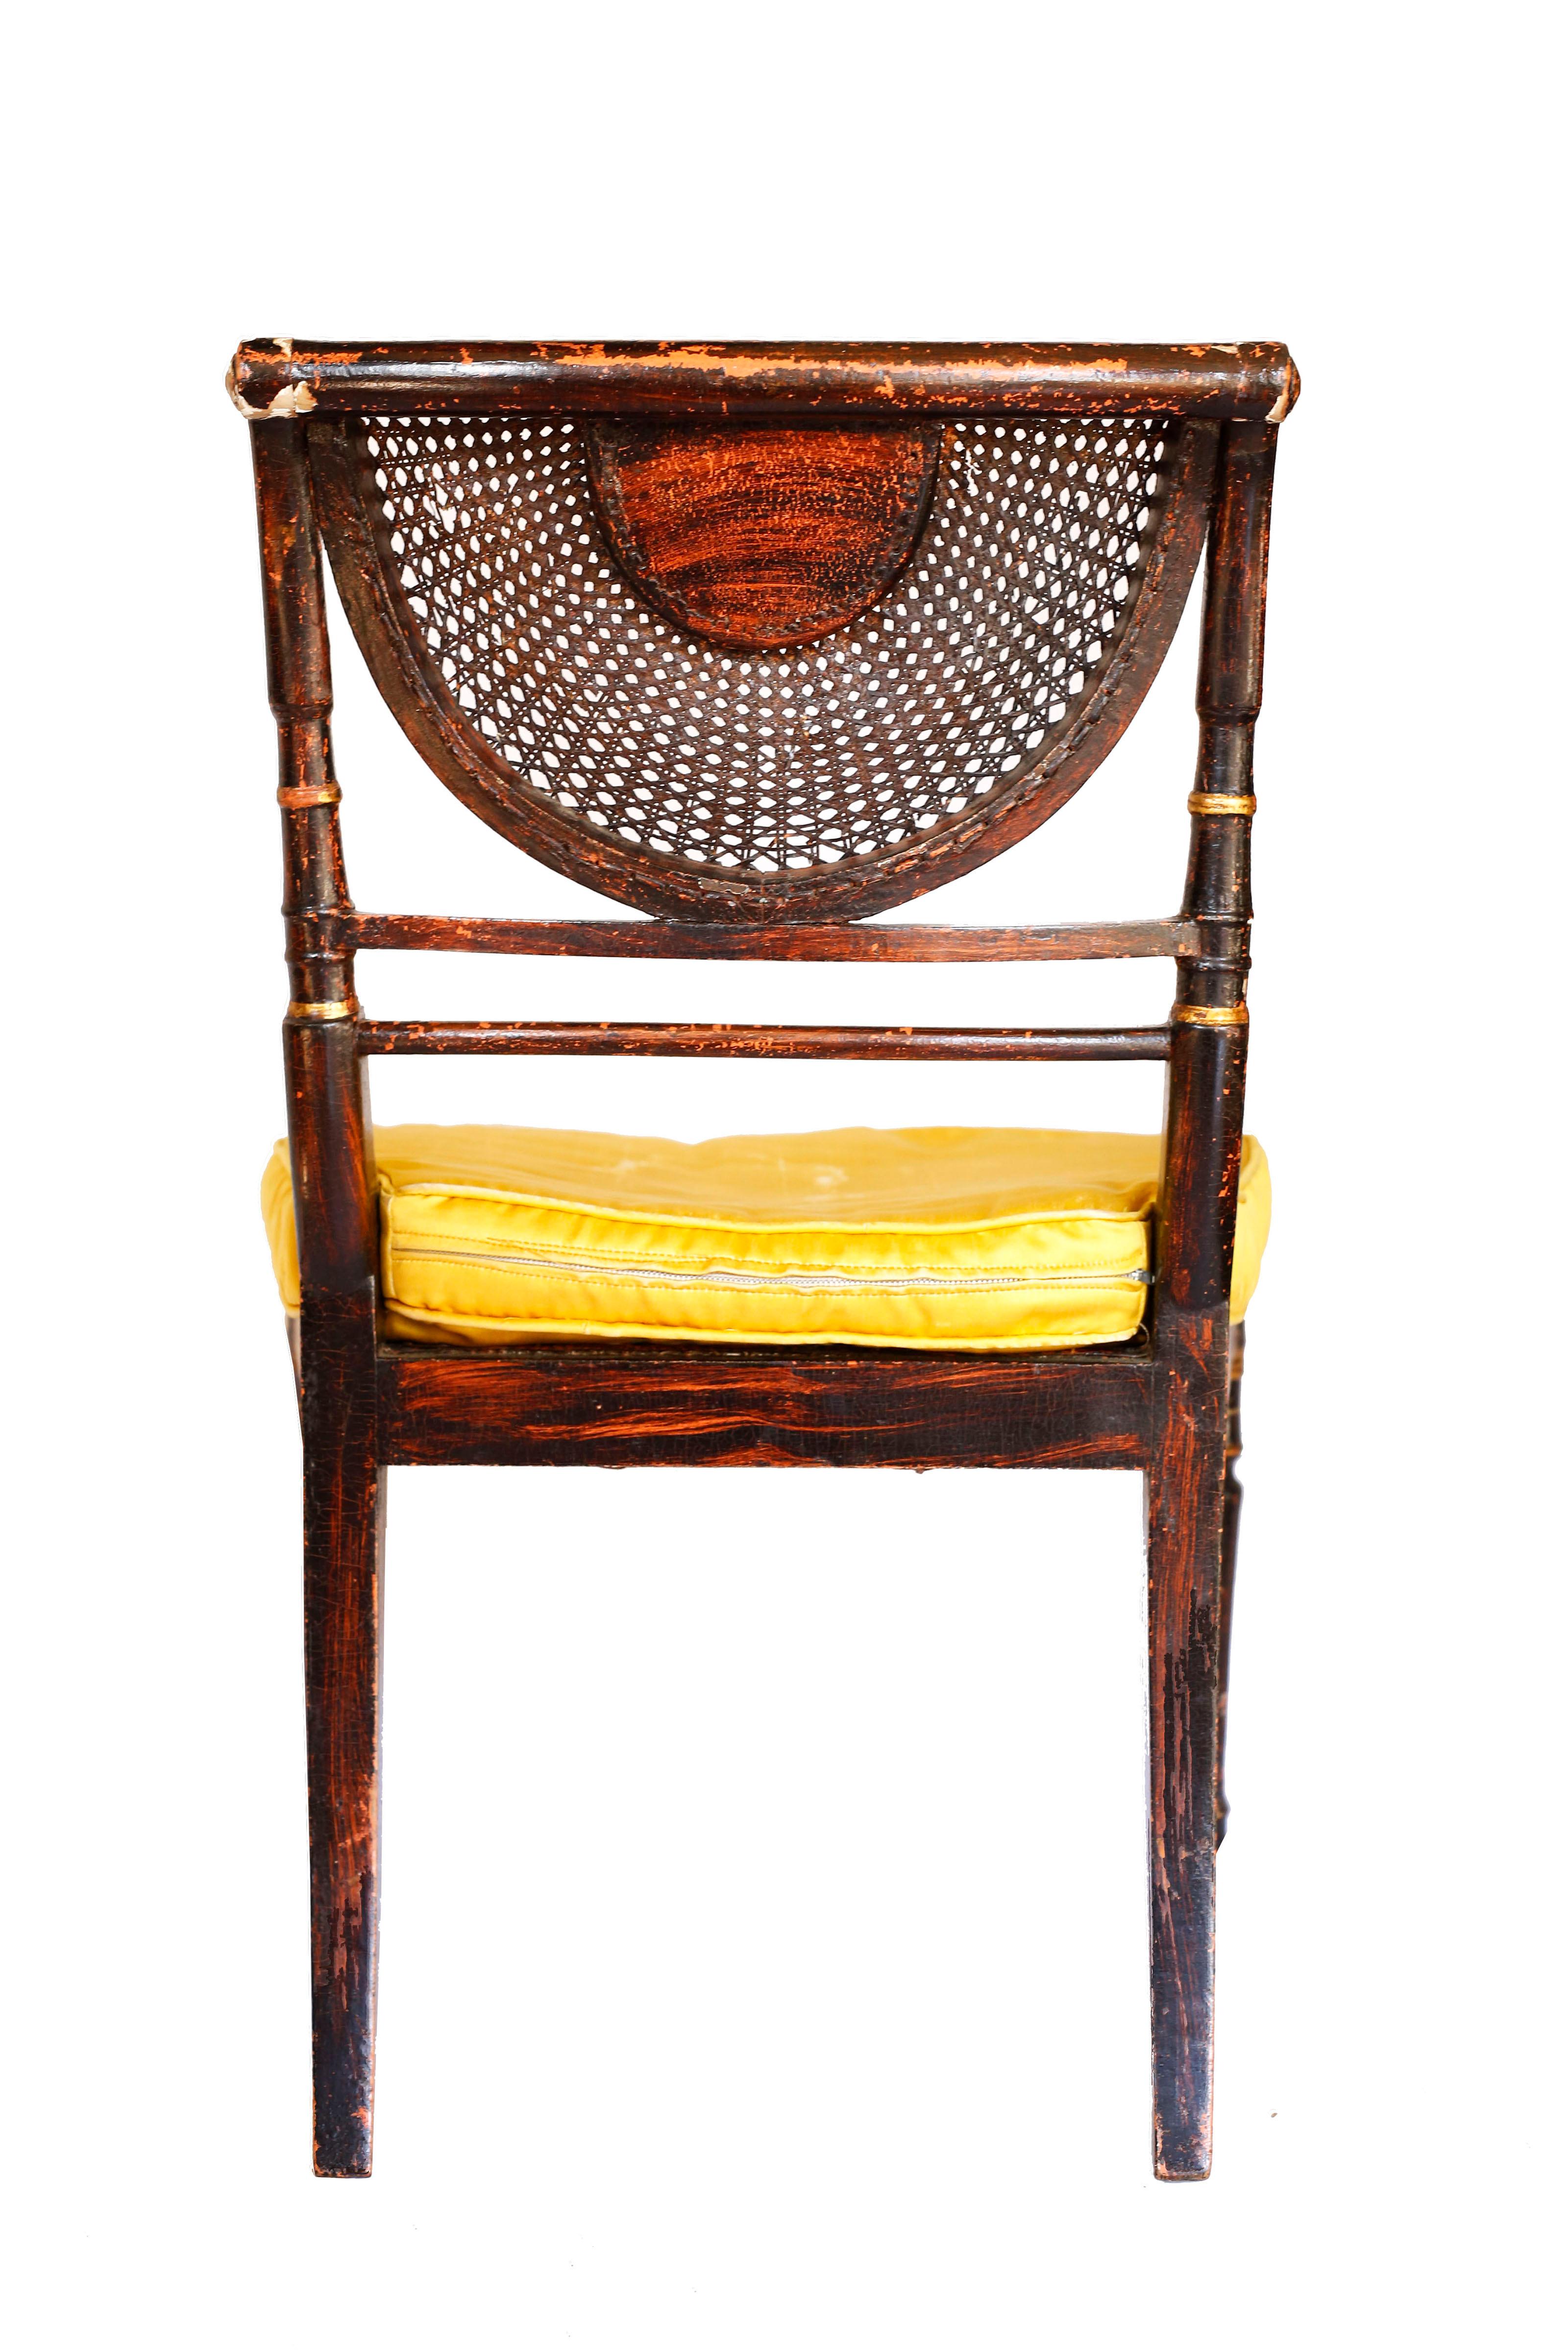 Regency Early 19th Century Parcel-Gilt Caned Armchair, after Angelica Kauffman